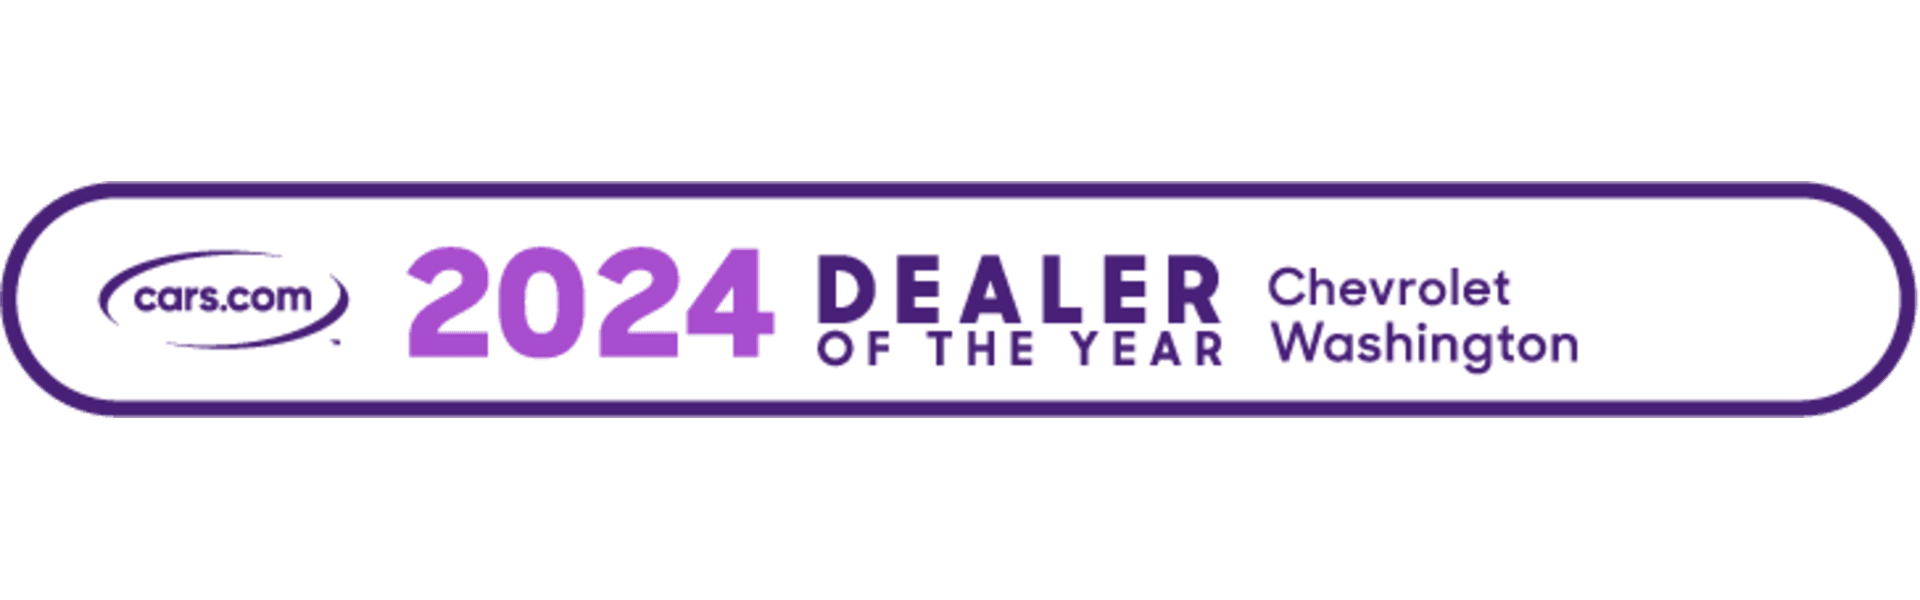 2024 Dealer of the Year